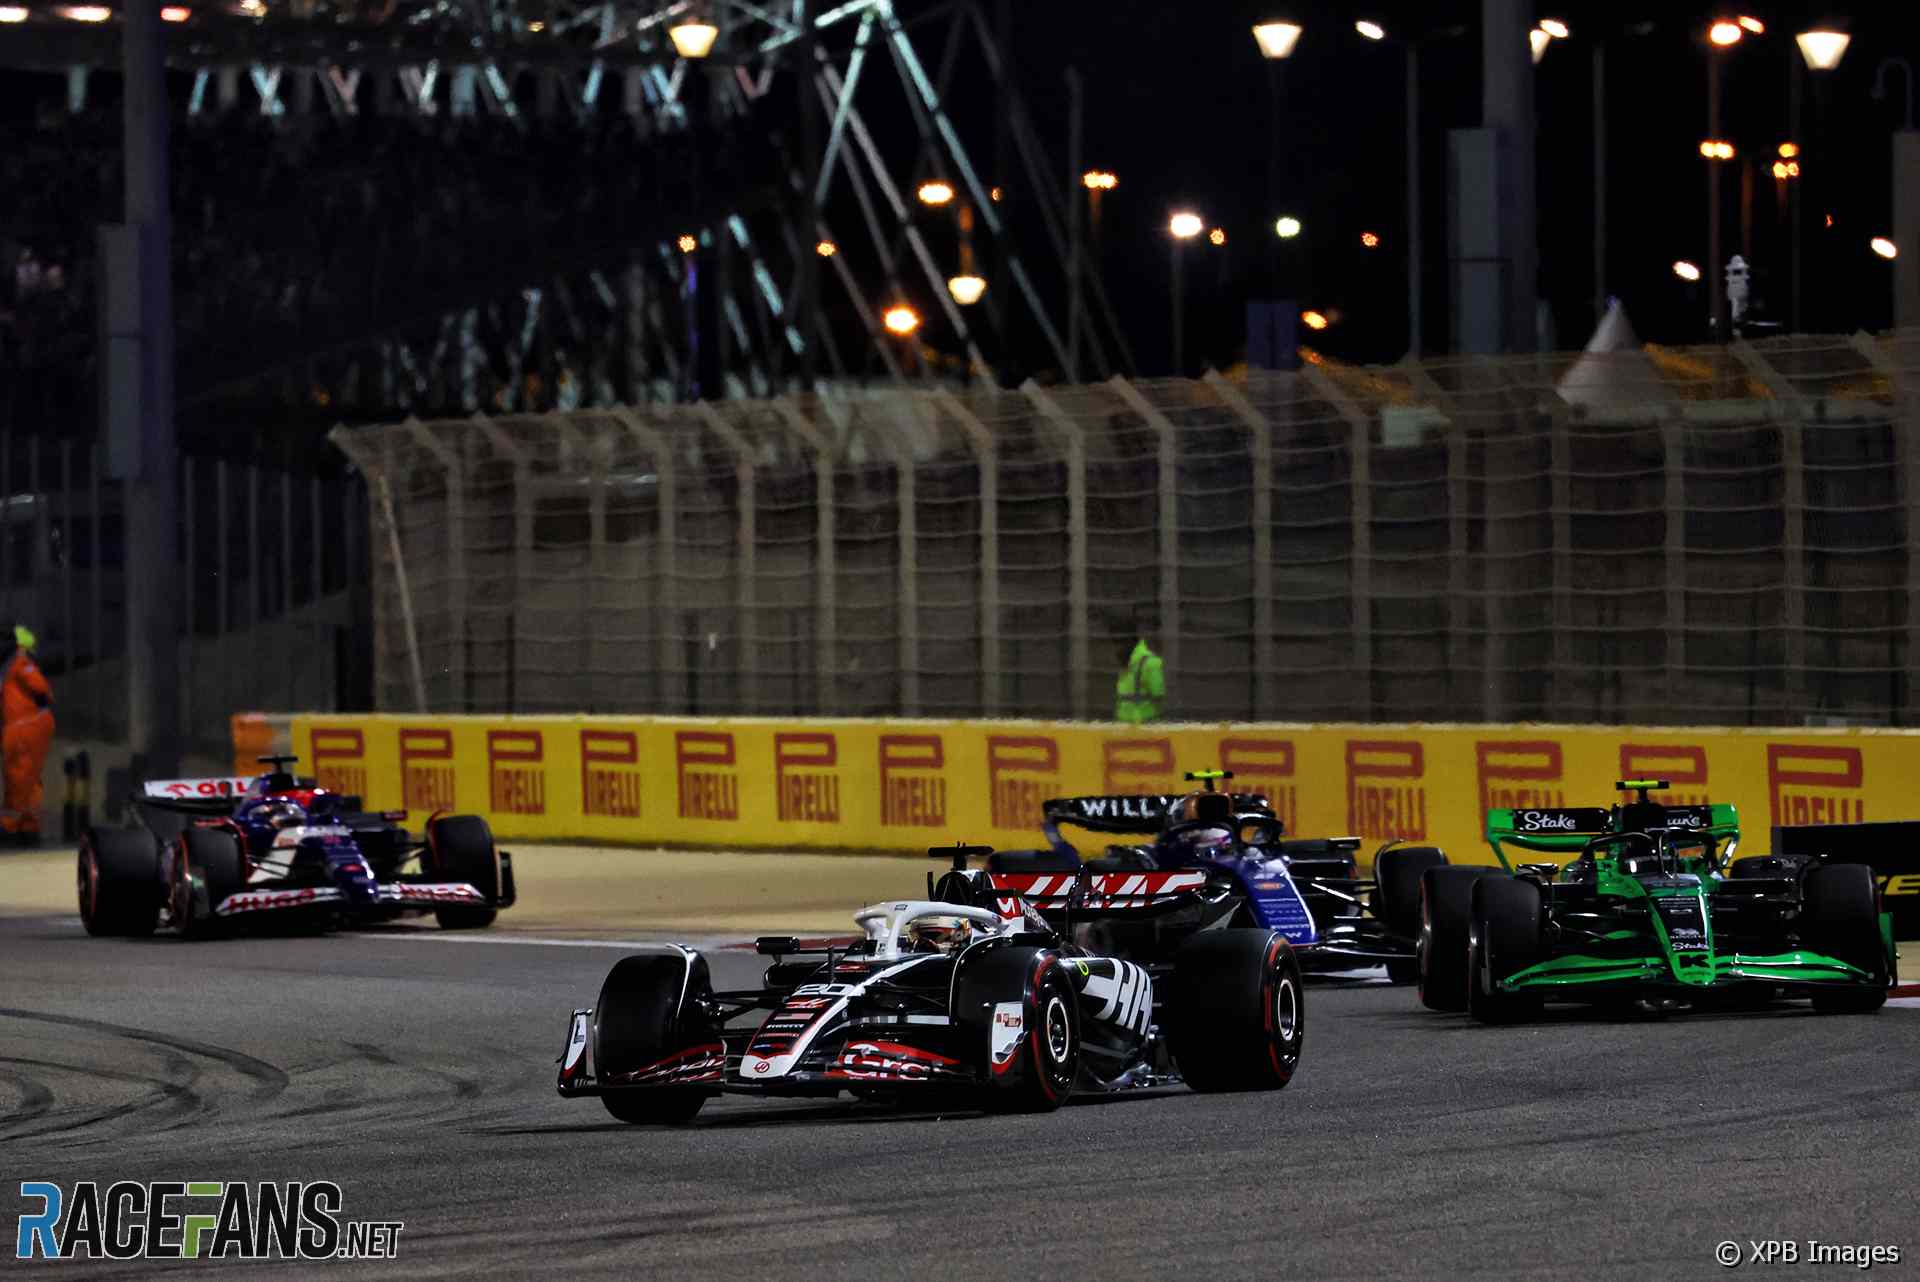 RB will complain to FIA over Magnussen's "unsportsmanlike" tactics · RaceFans